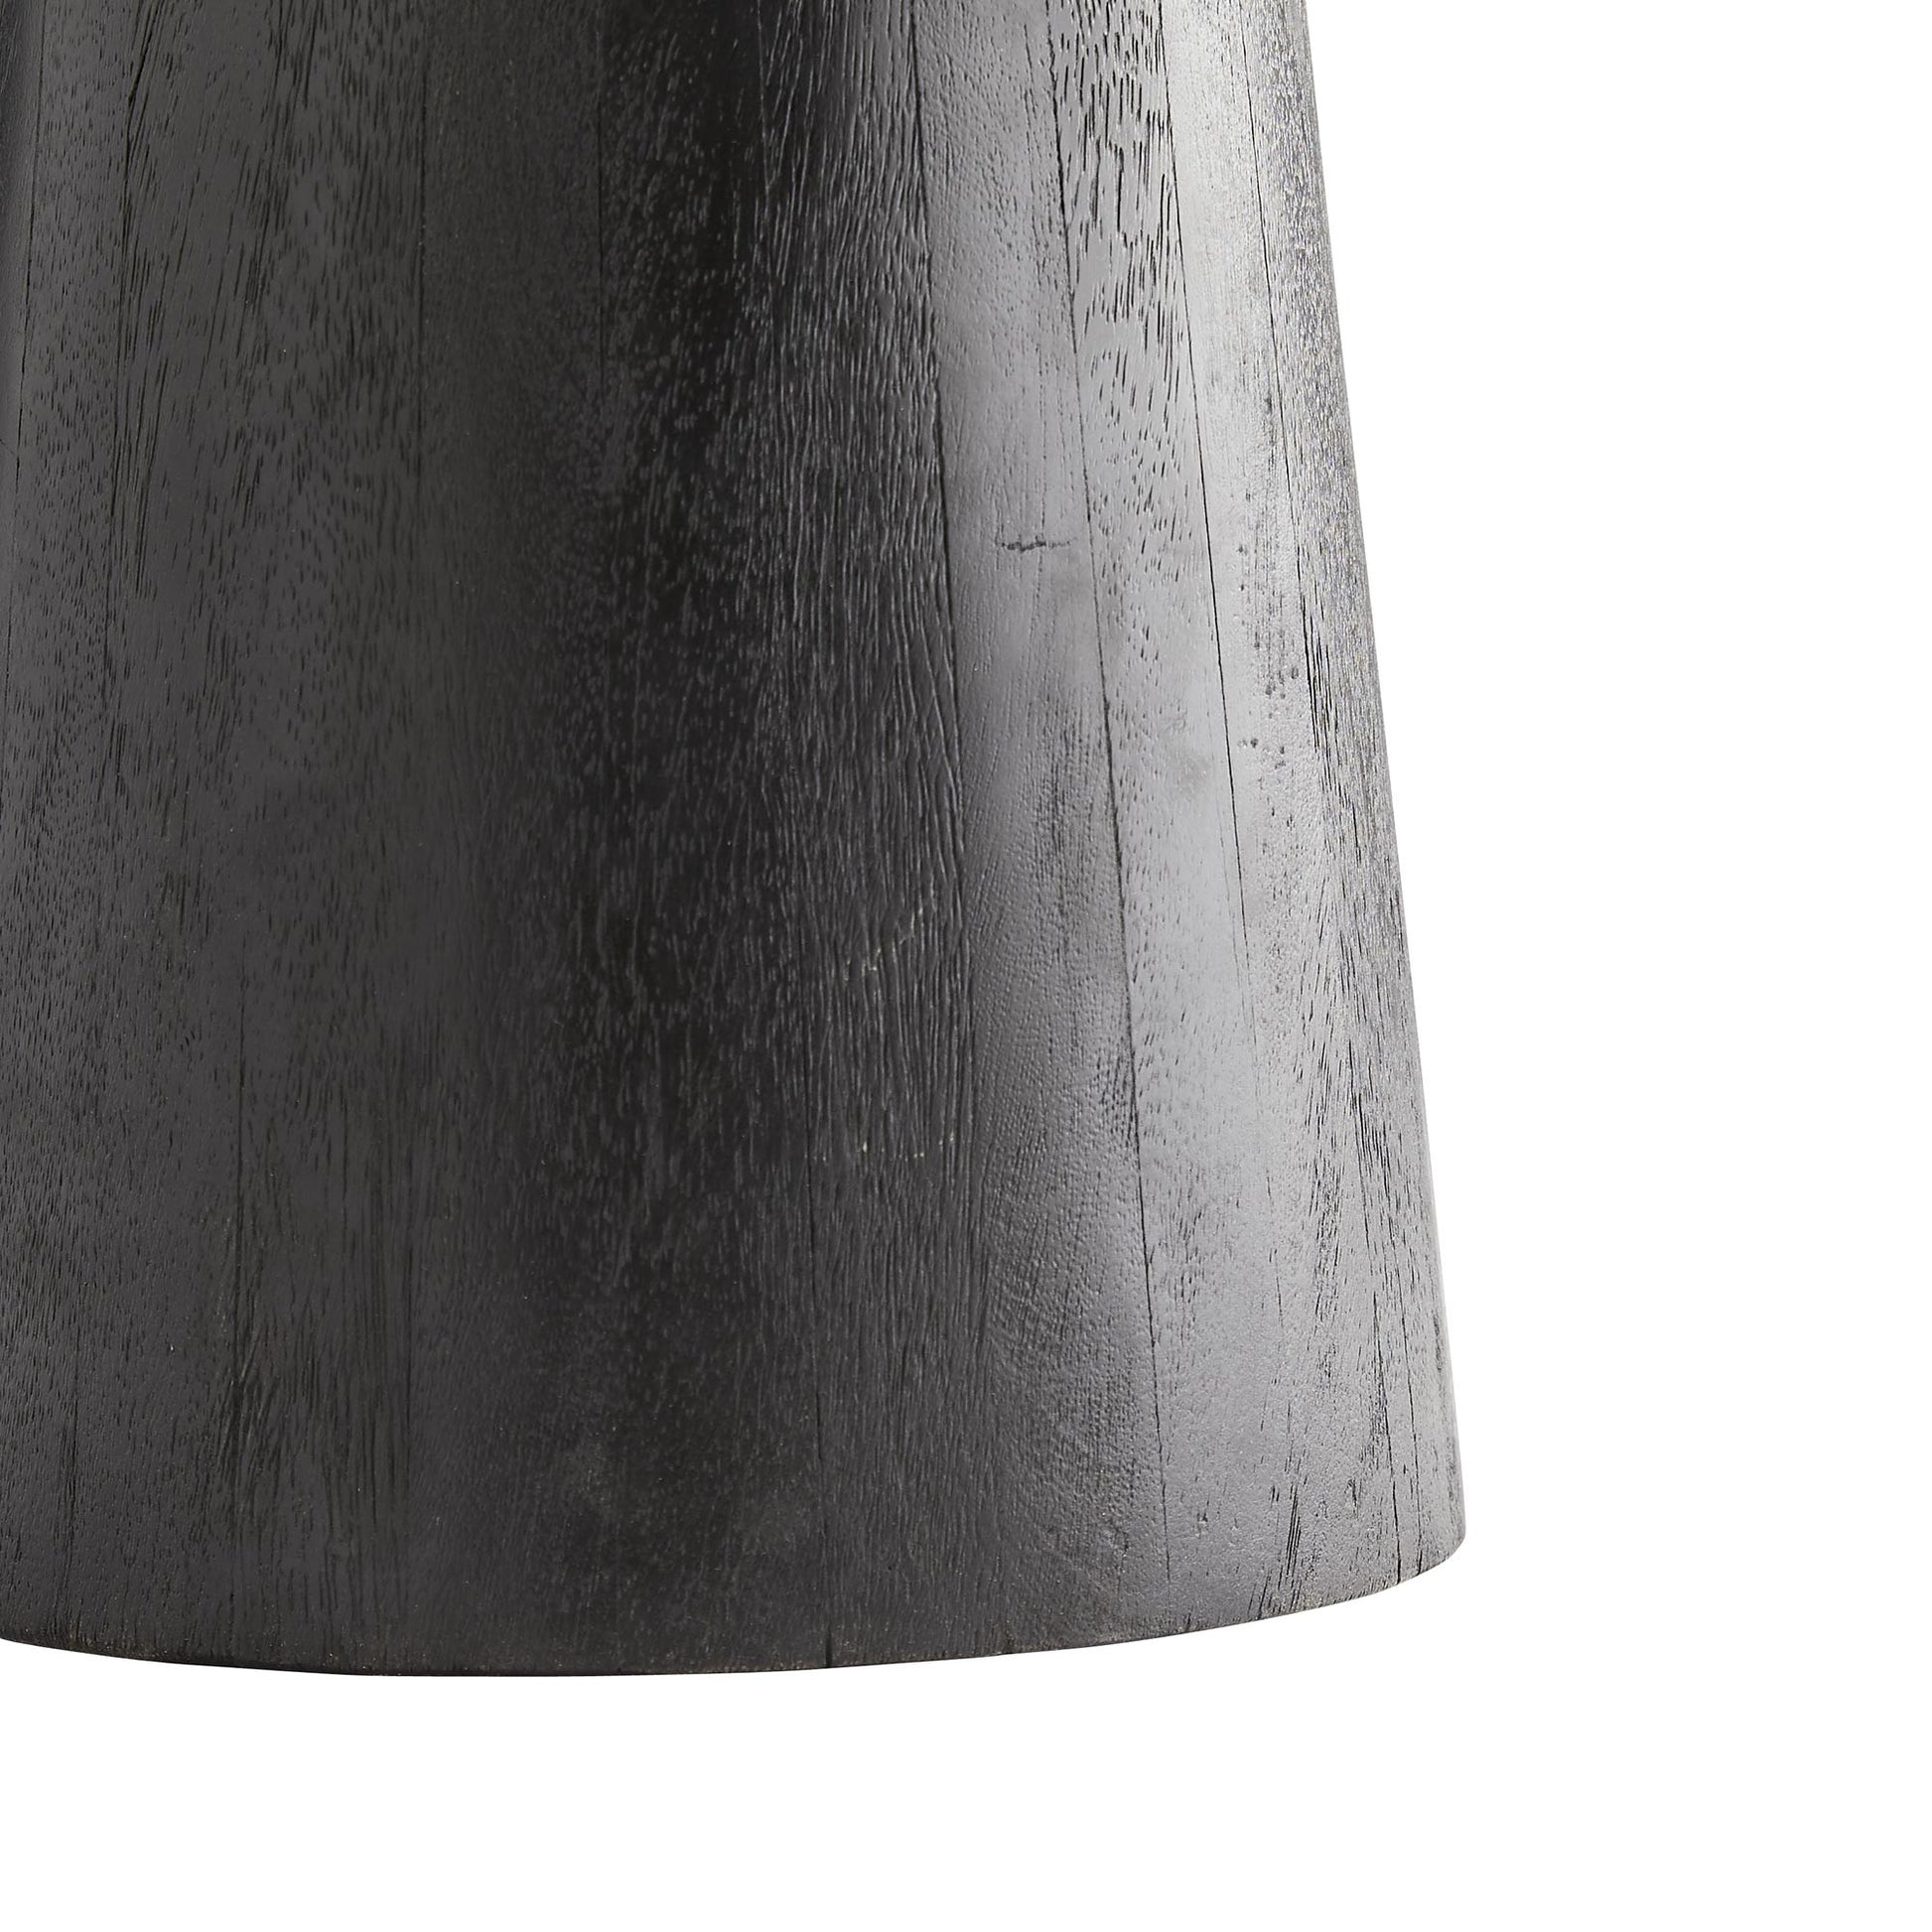 arteriors theodore side table base